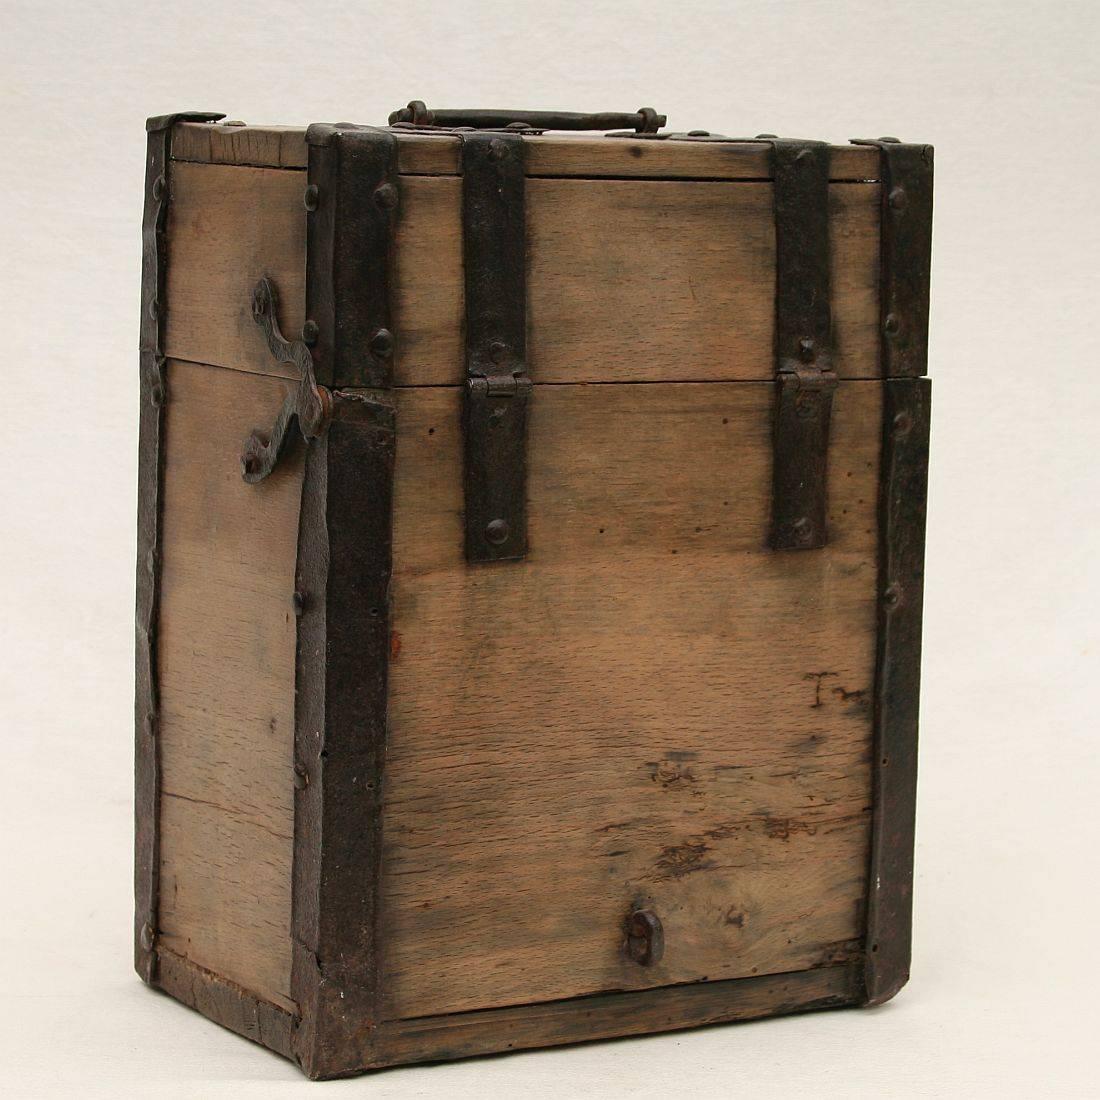 Forged 17th-18th Century German Wooden Strong Box